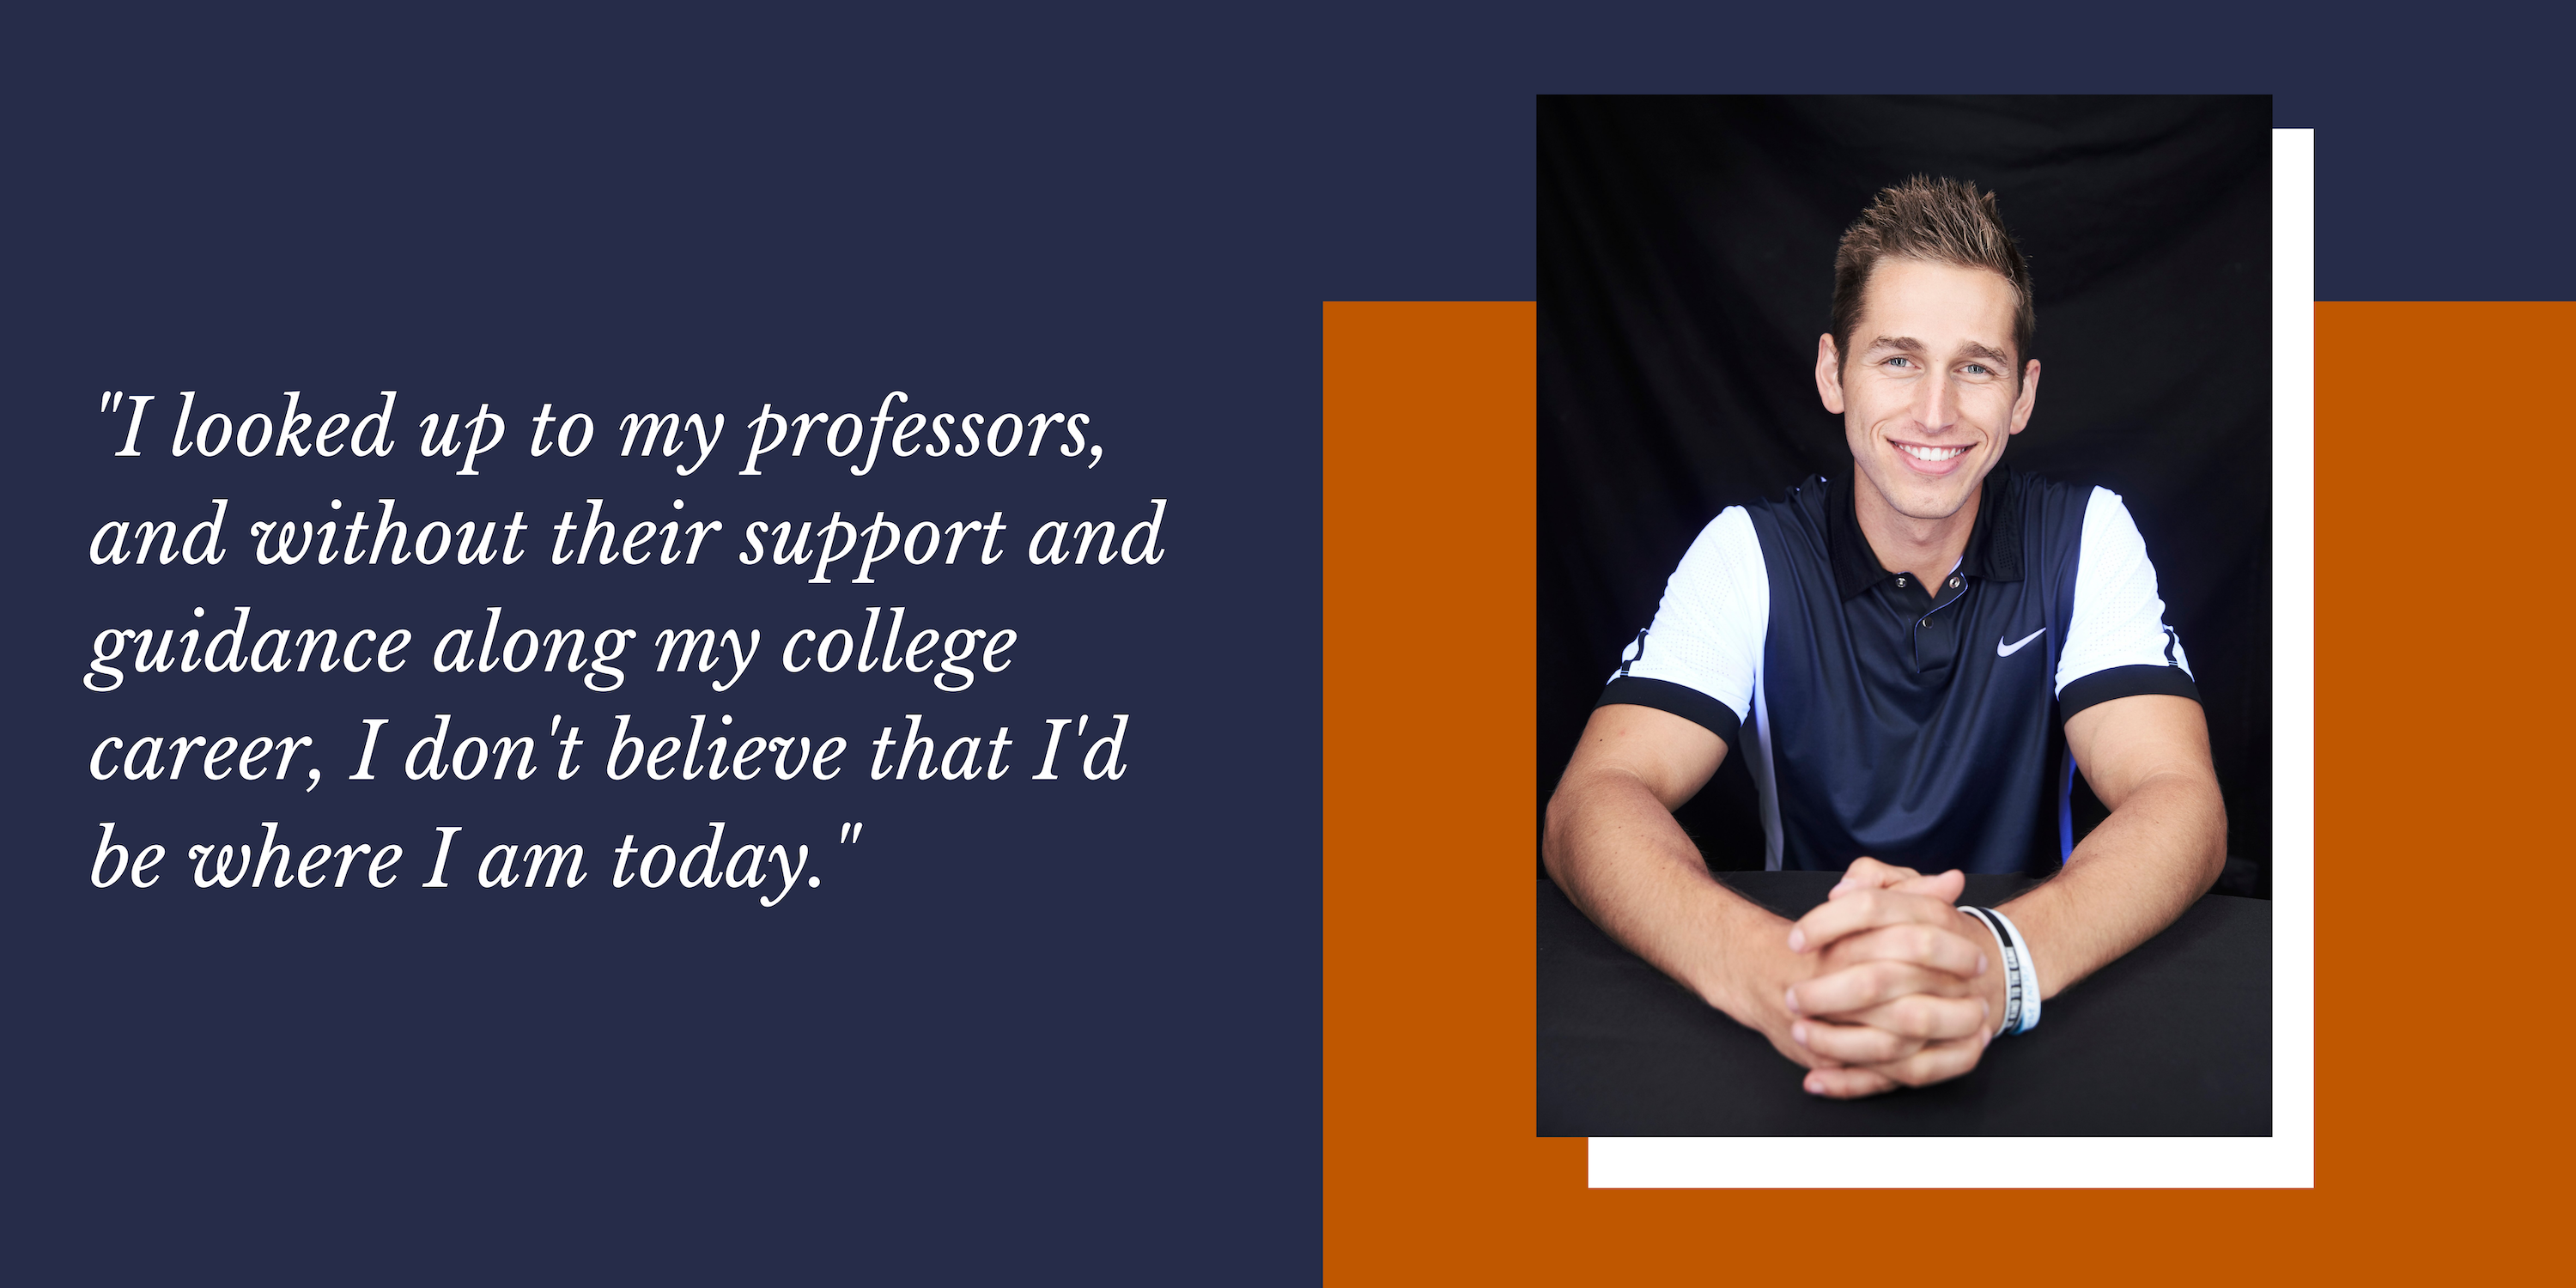 Blue background with burnt orange with an image of UT Journalism Alumni Adam Beard on the right. A quote on the left reads, "I looked up to my professors, and without their support and guidance along my college career, I don't believe that I'd be where I am today."